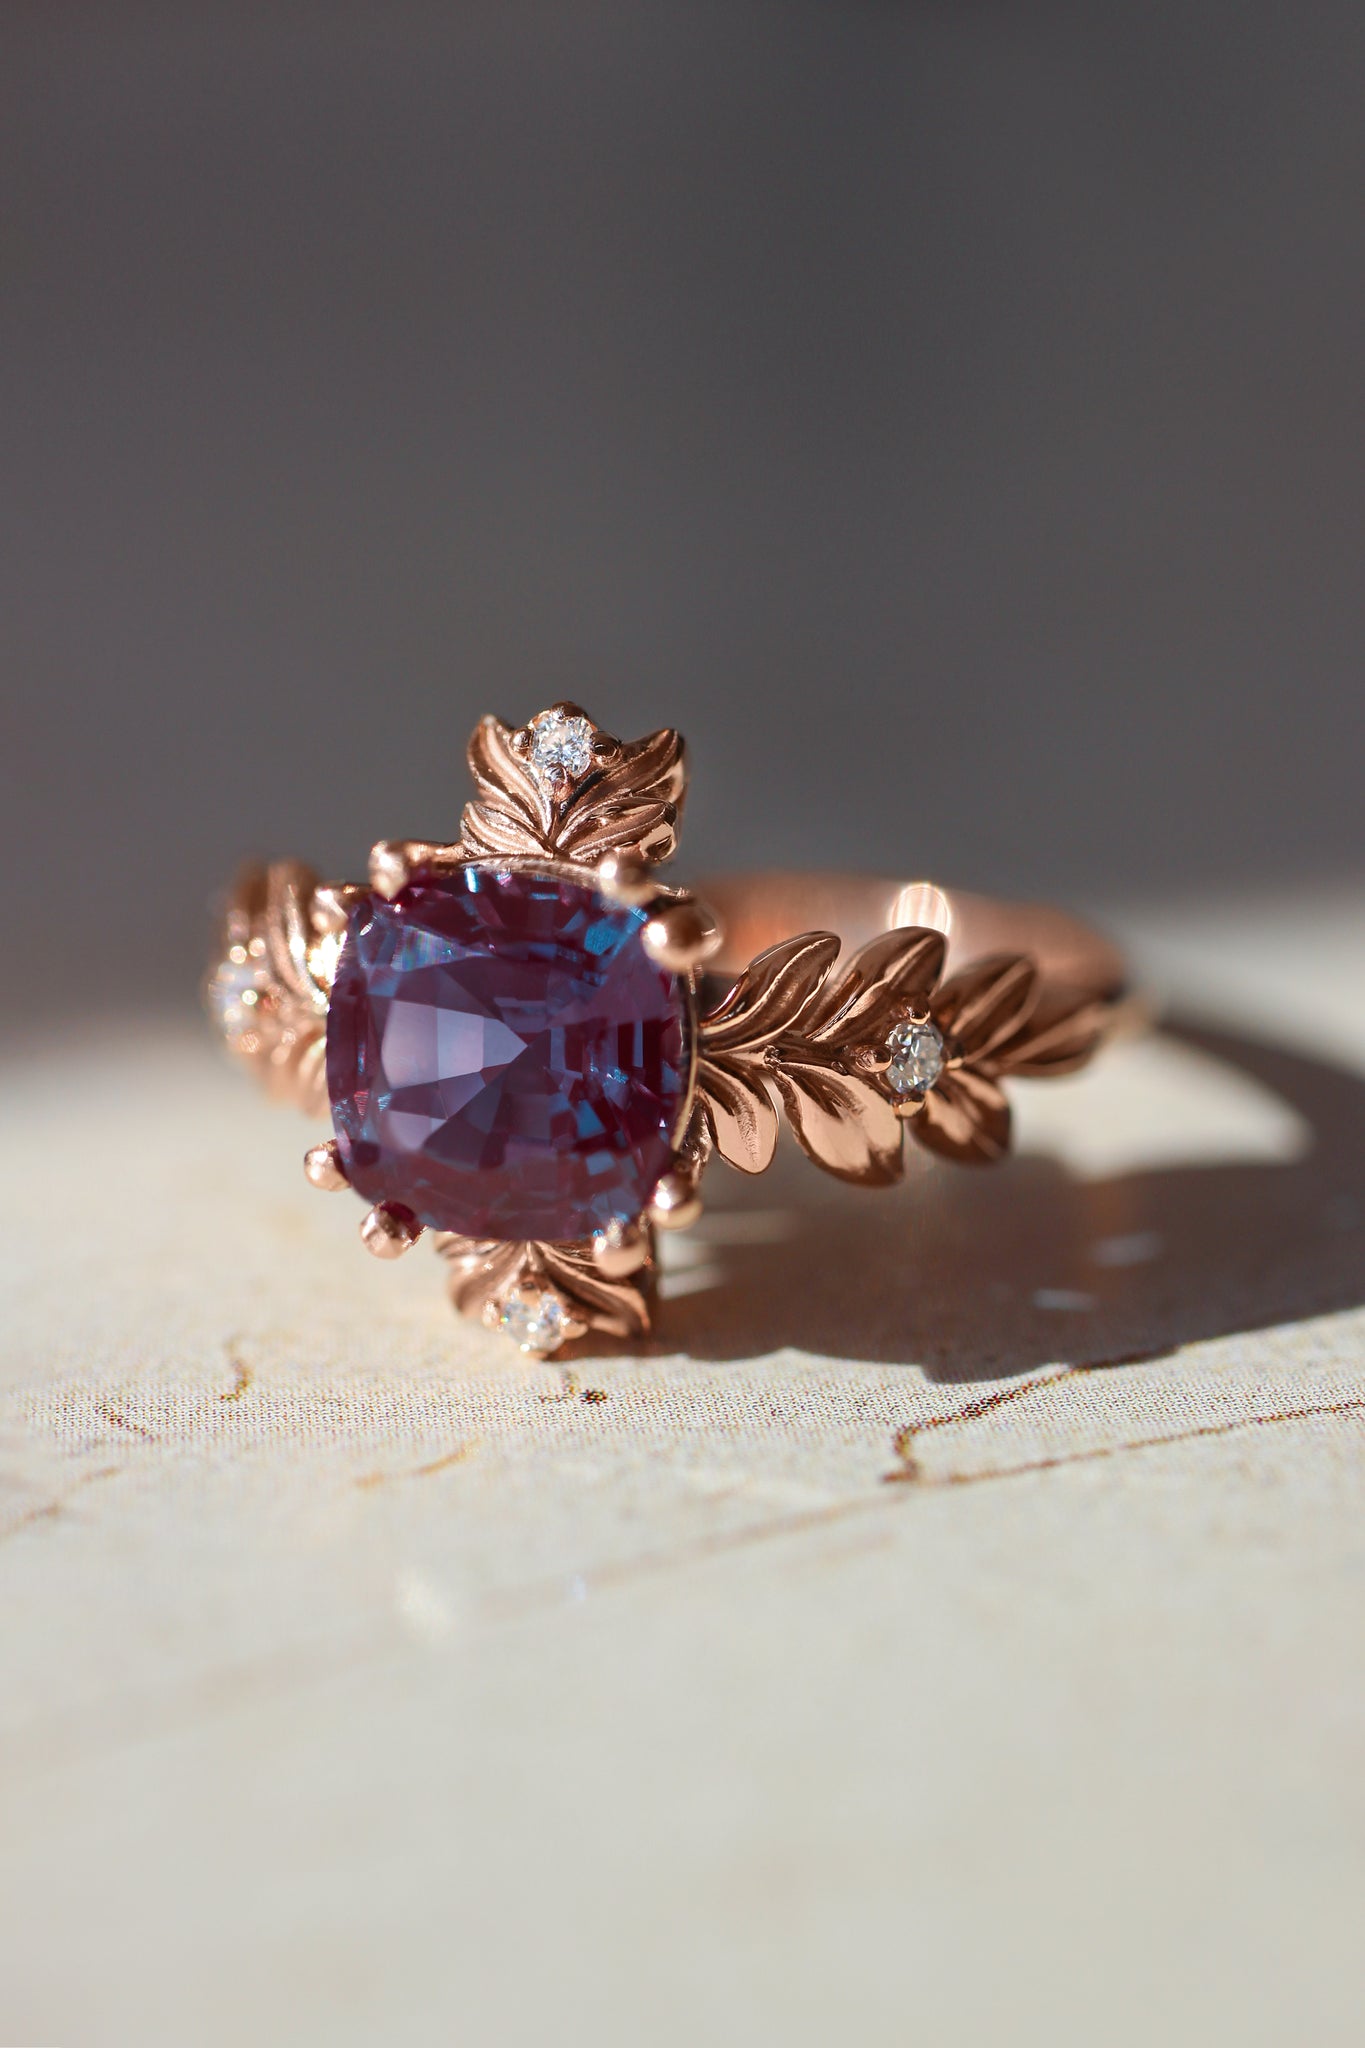 Cushion alexandrite ring with diamonds, leaf engagement ring - Eden Garden Jewelry™